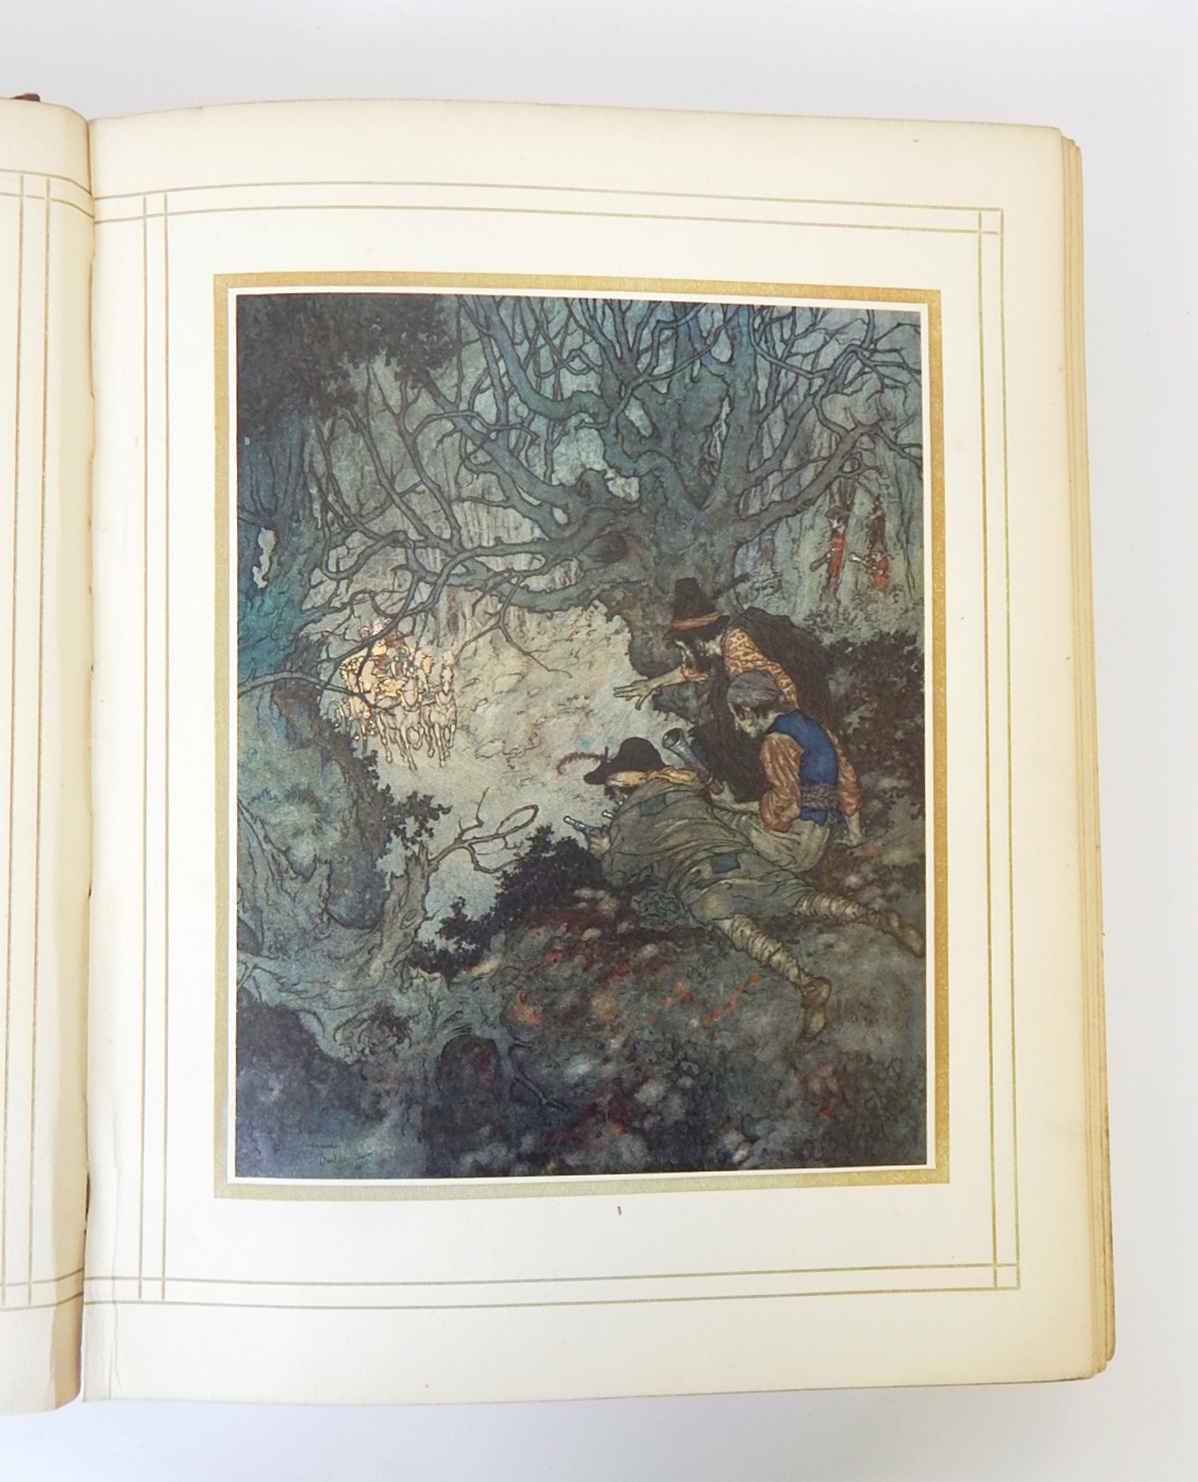 Dulac, Edmond (ills) "Stories from Hans Andersen", Hodder & Stoughton 1911, colour plates tipped in, - Image 4 of 4